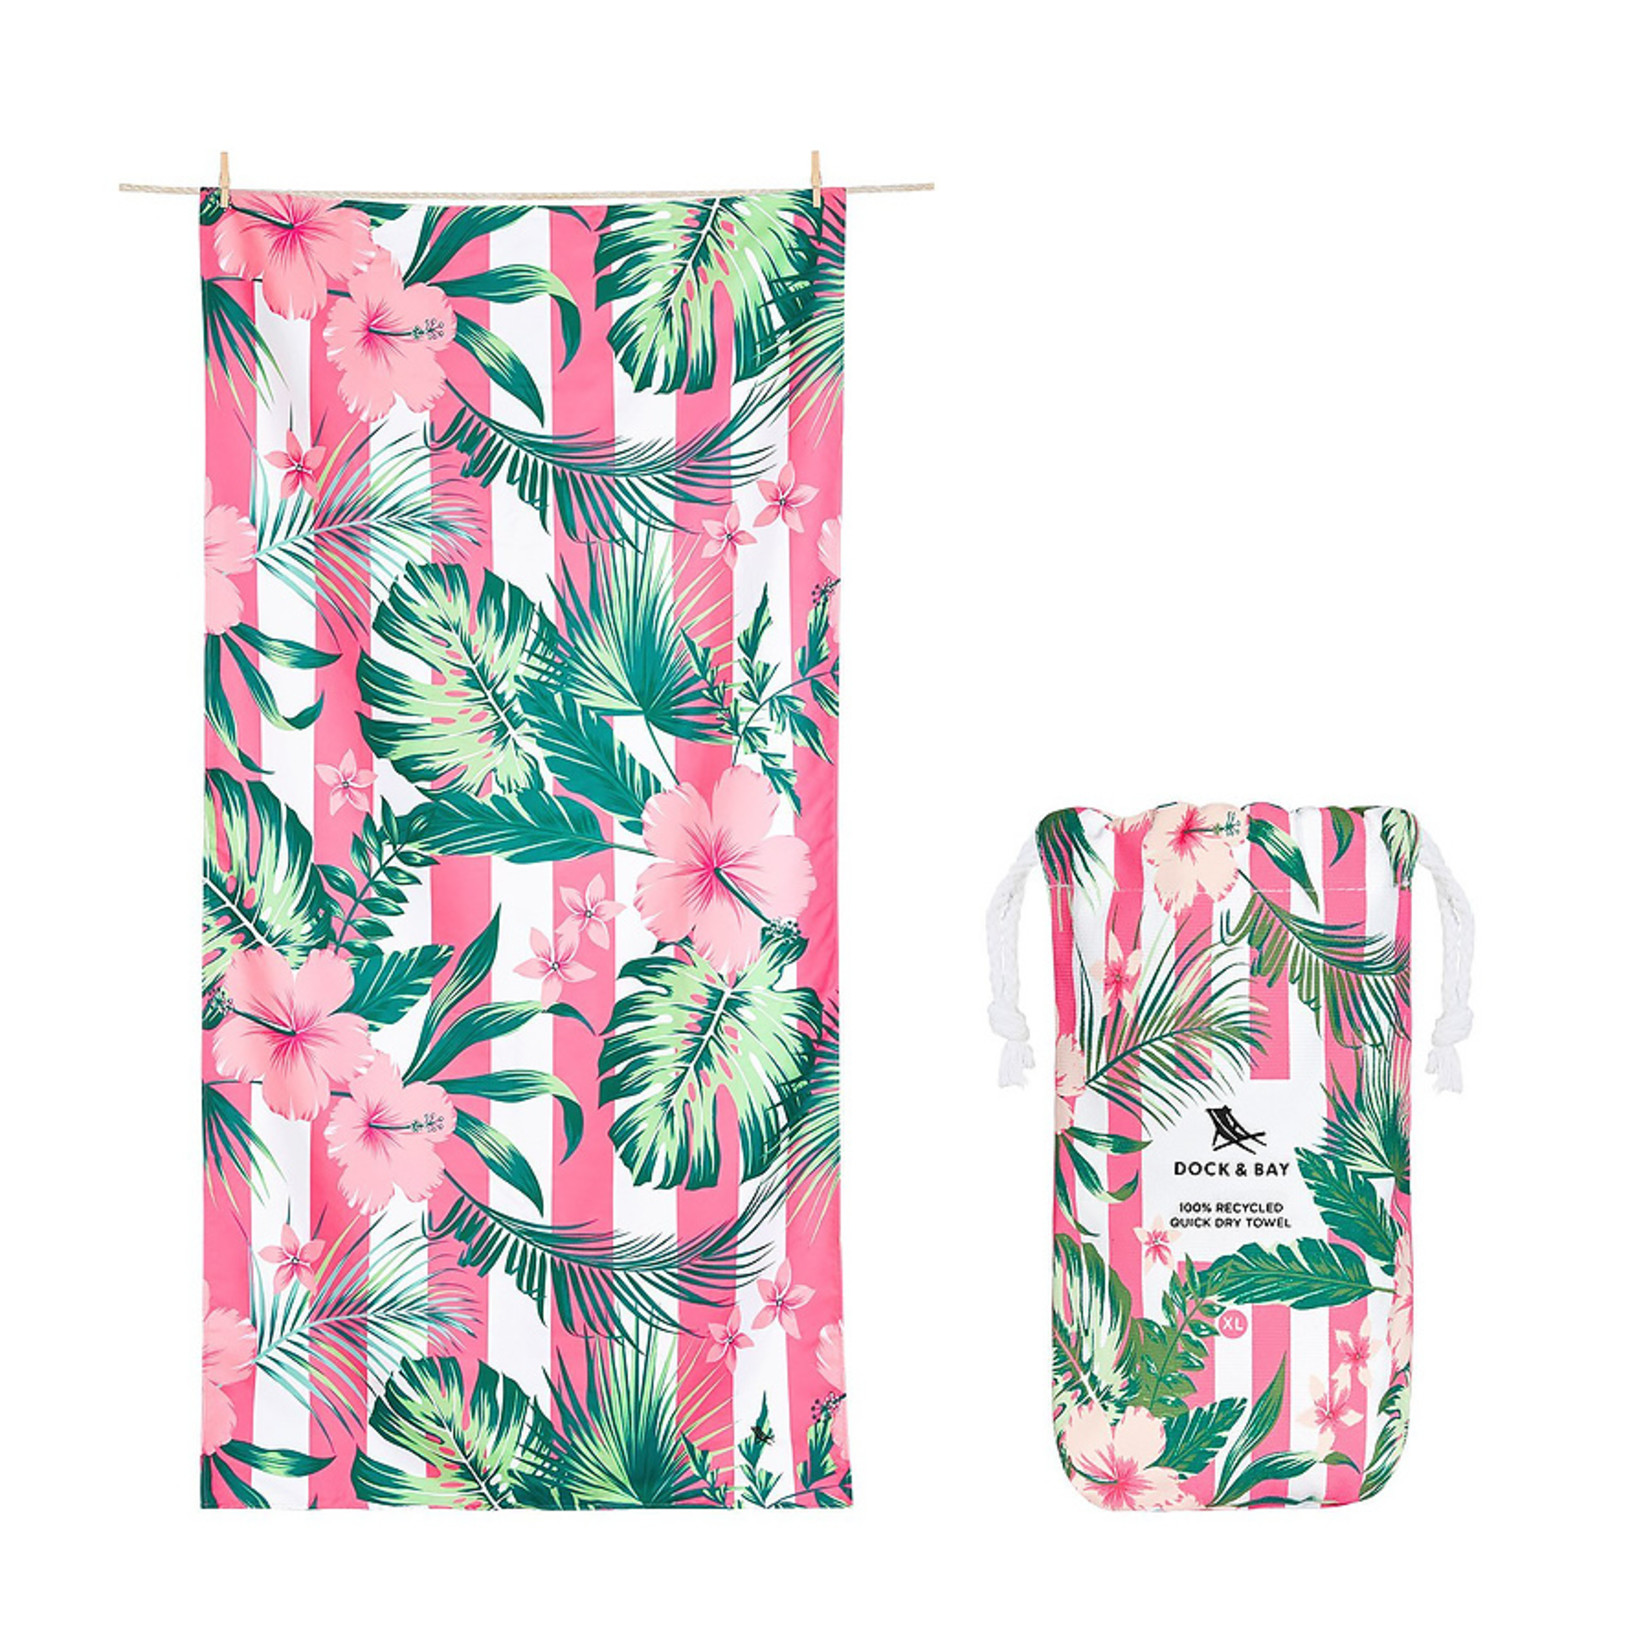 Dock & Bay Quick Dry Towel Botanical Collection